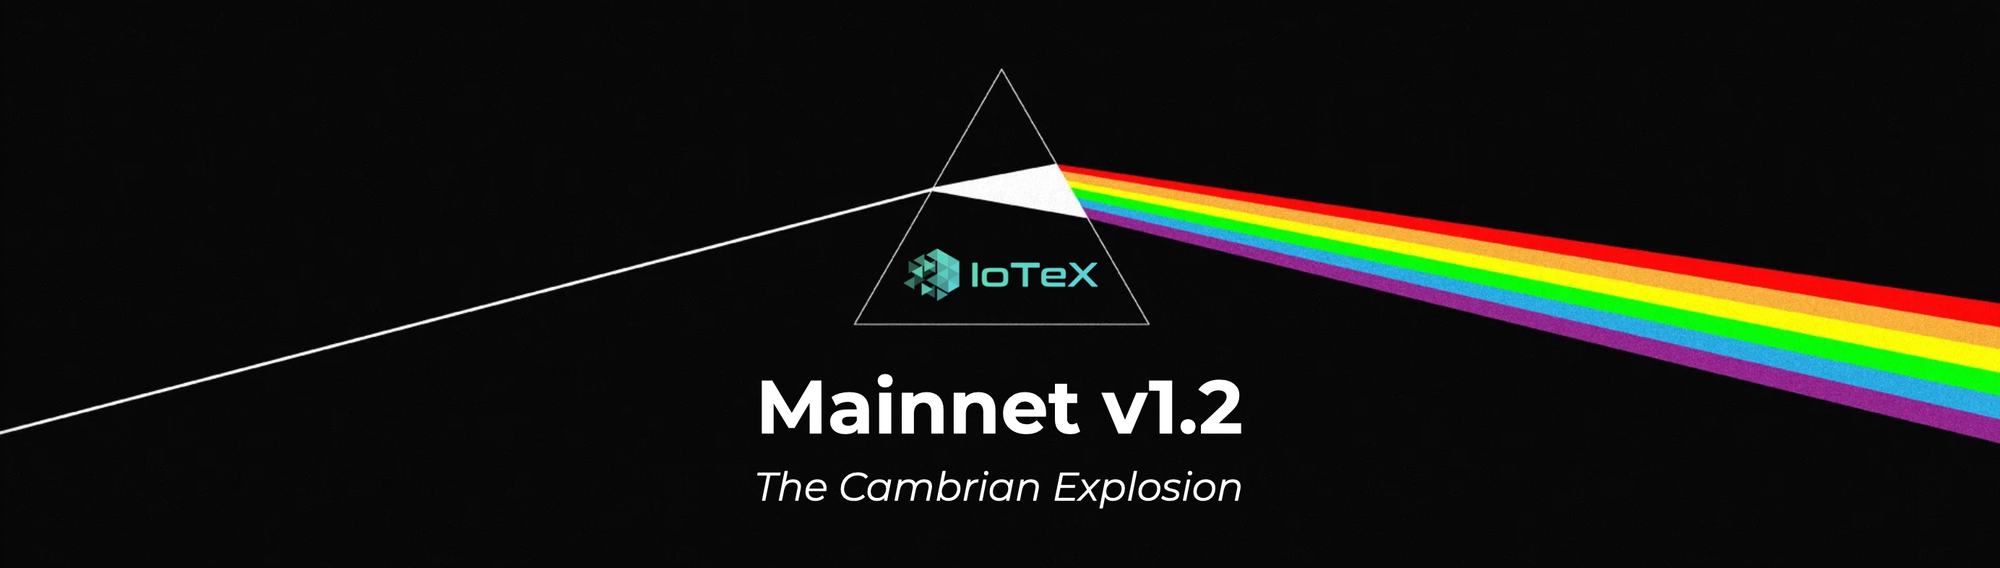 Mainnet v1.2 — Activating the Cambrian Explosion on IoTeX